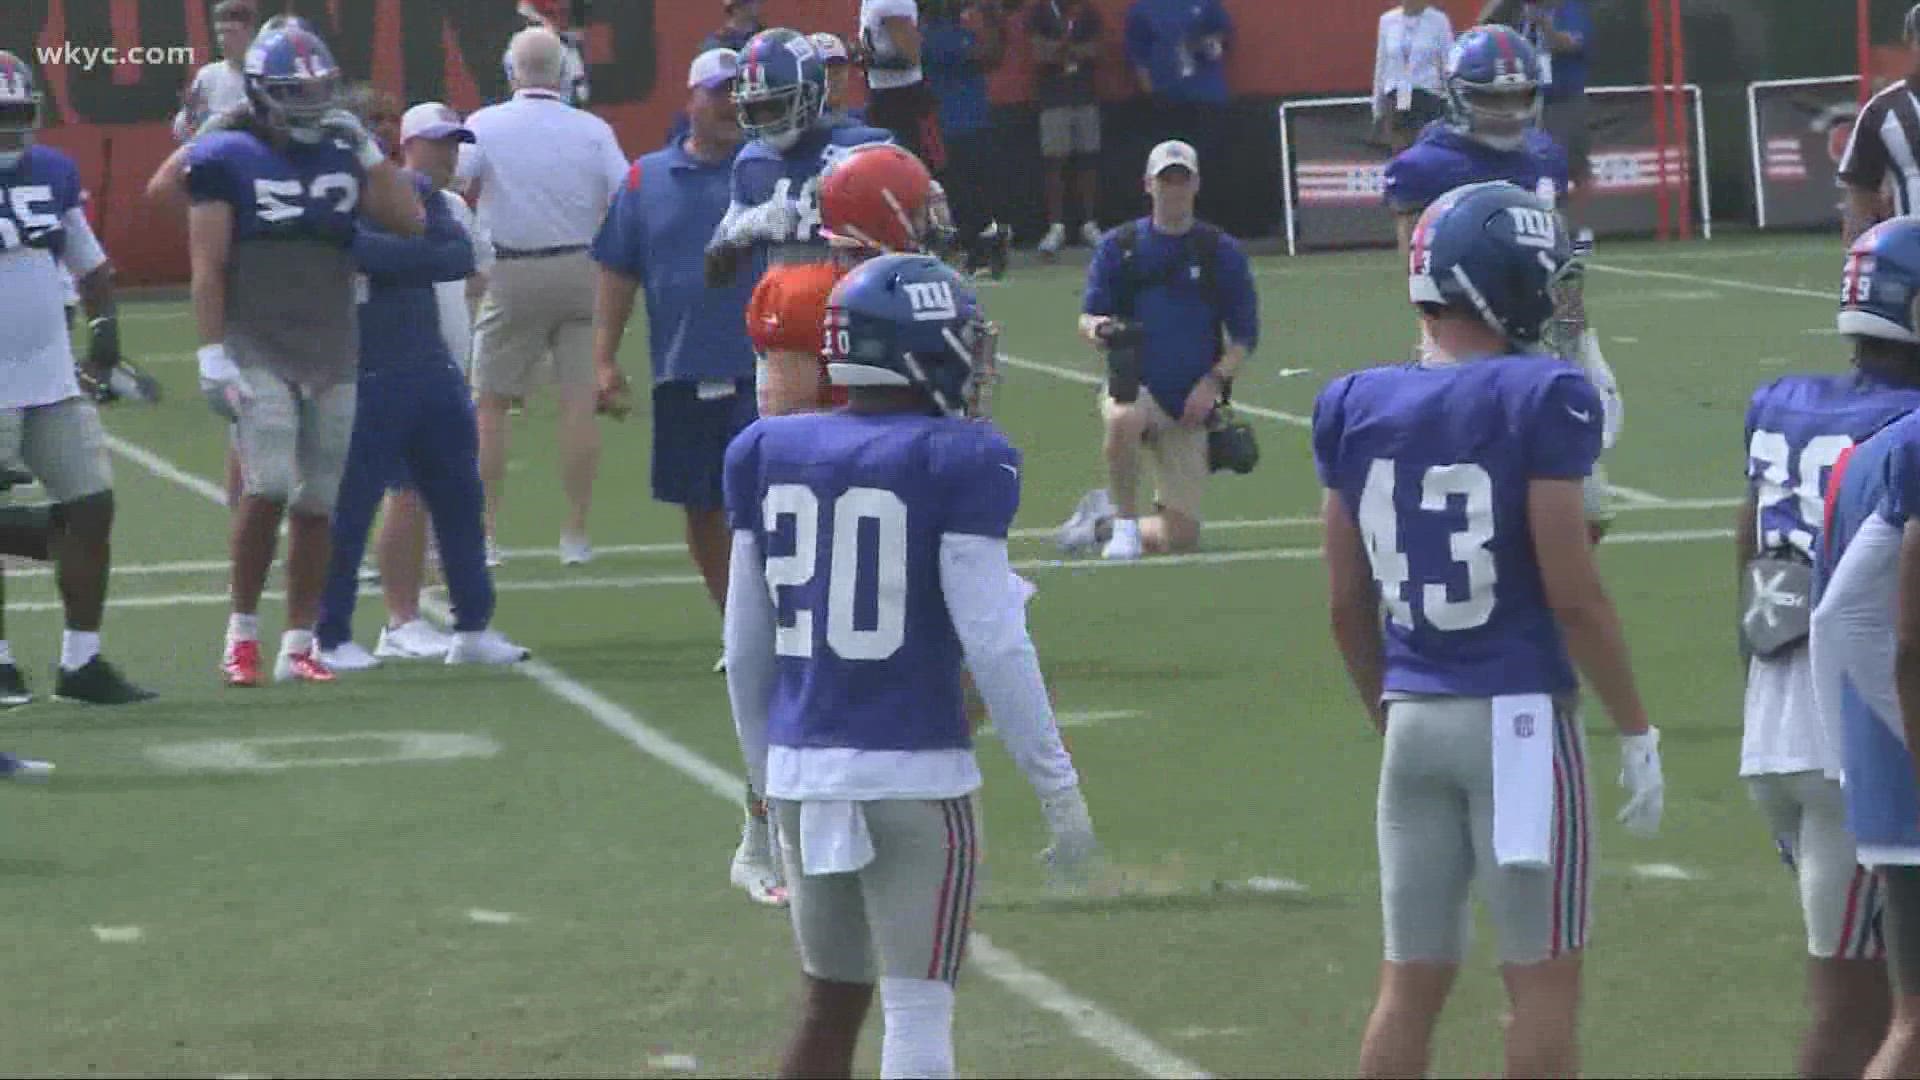 The New York Giants are in town, practicing and then playing the Browns in preseason action this weekend. Jim Donovan has the details.